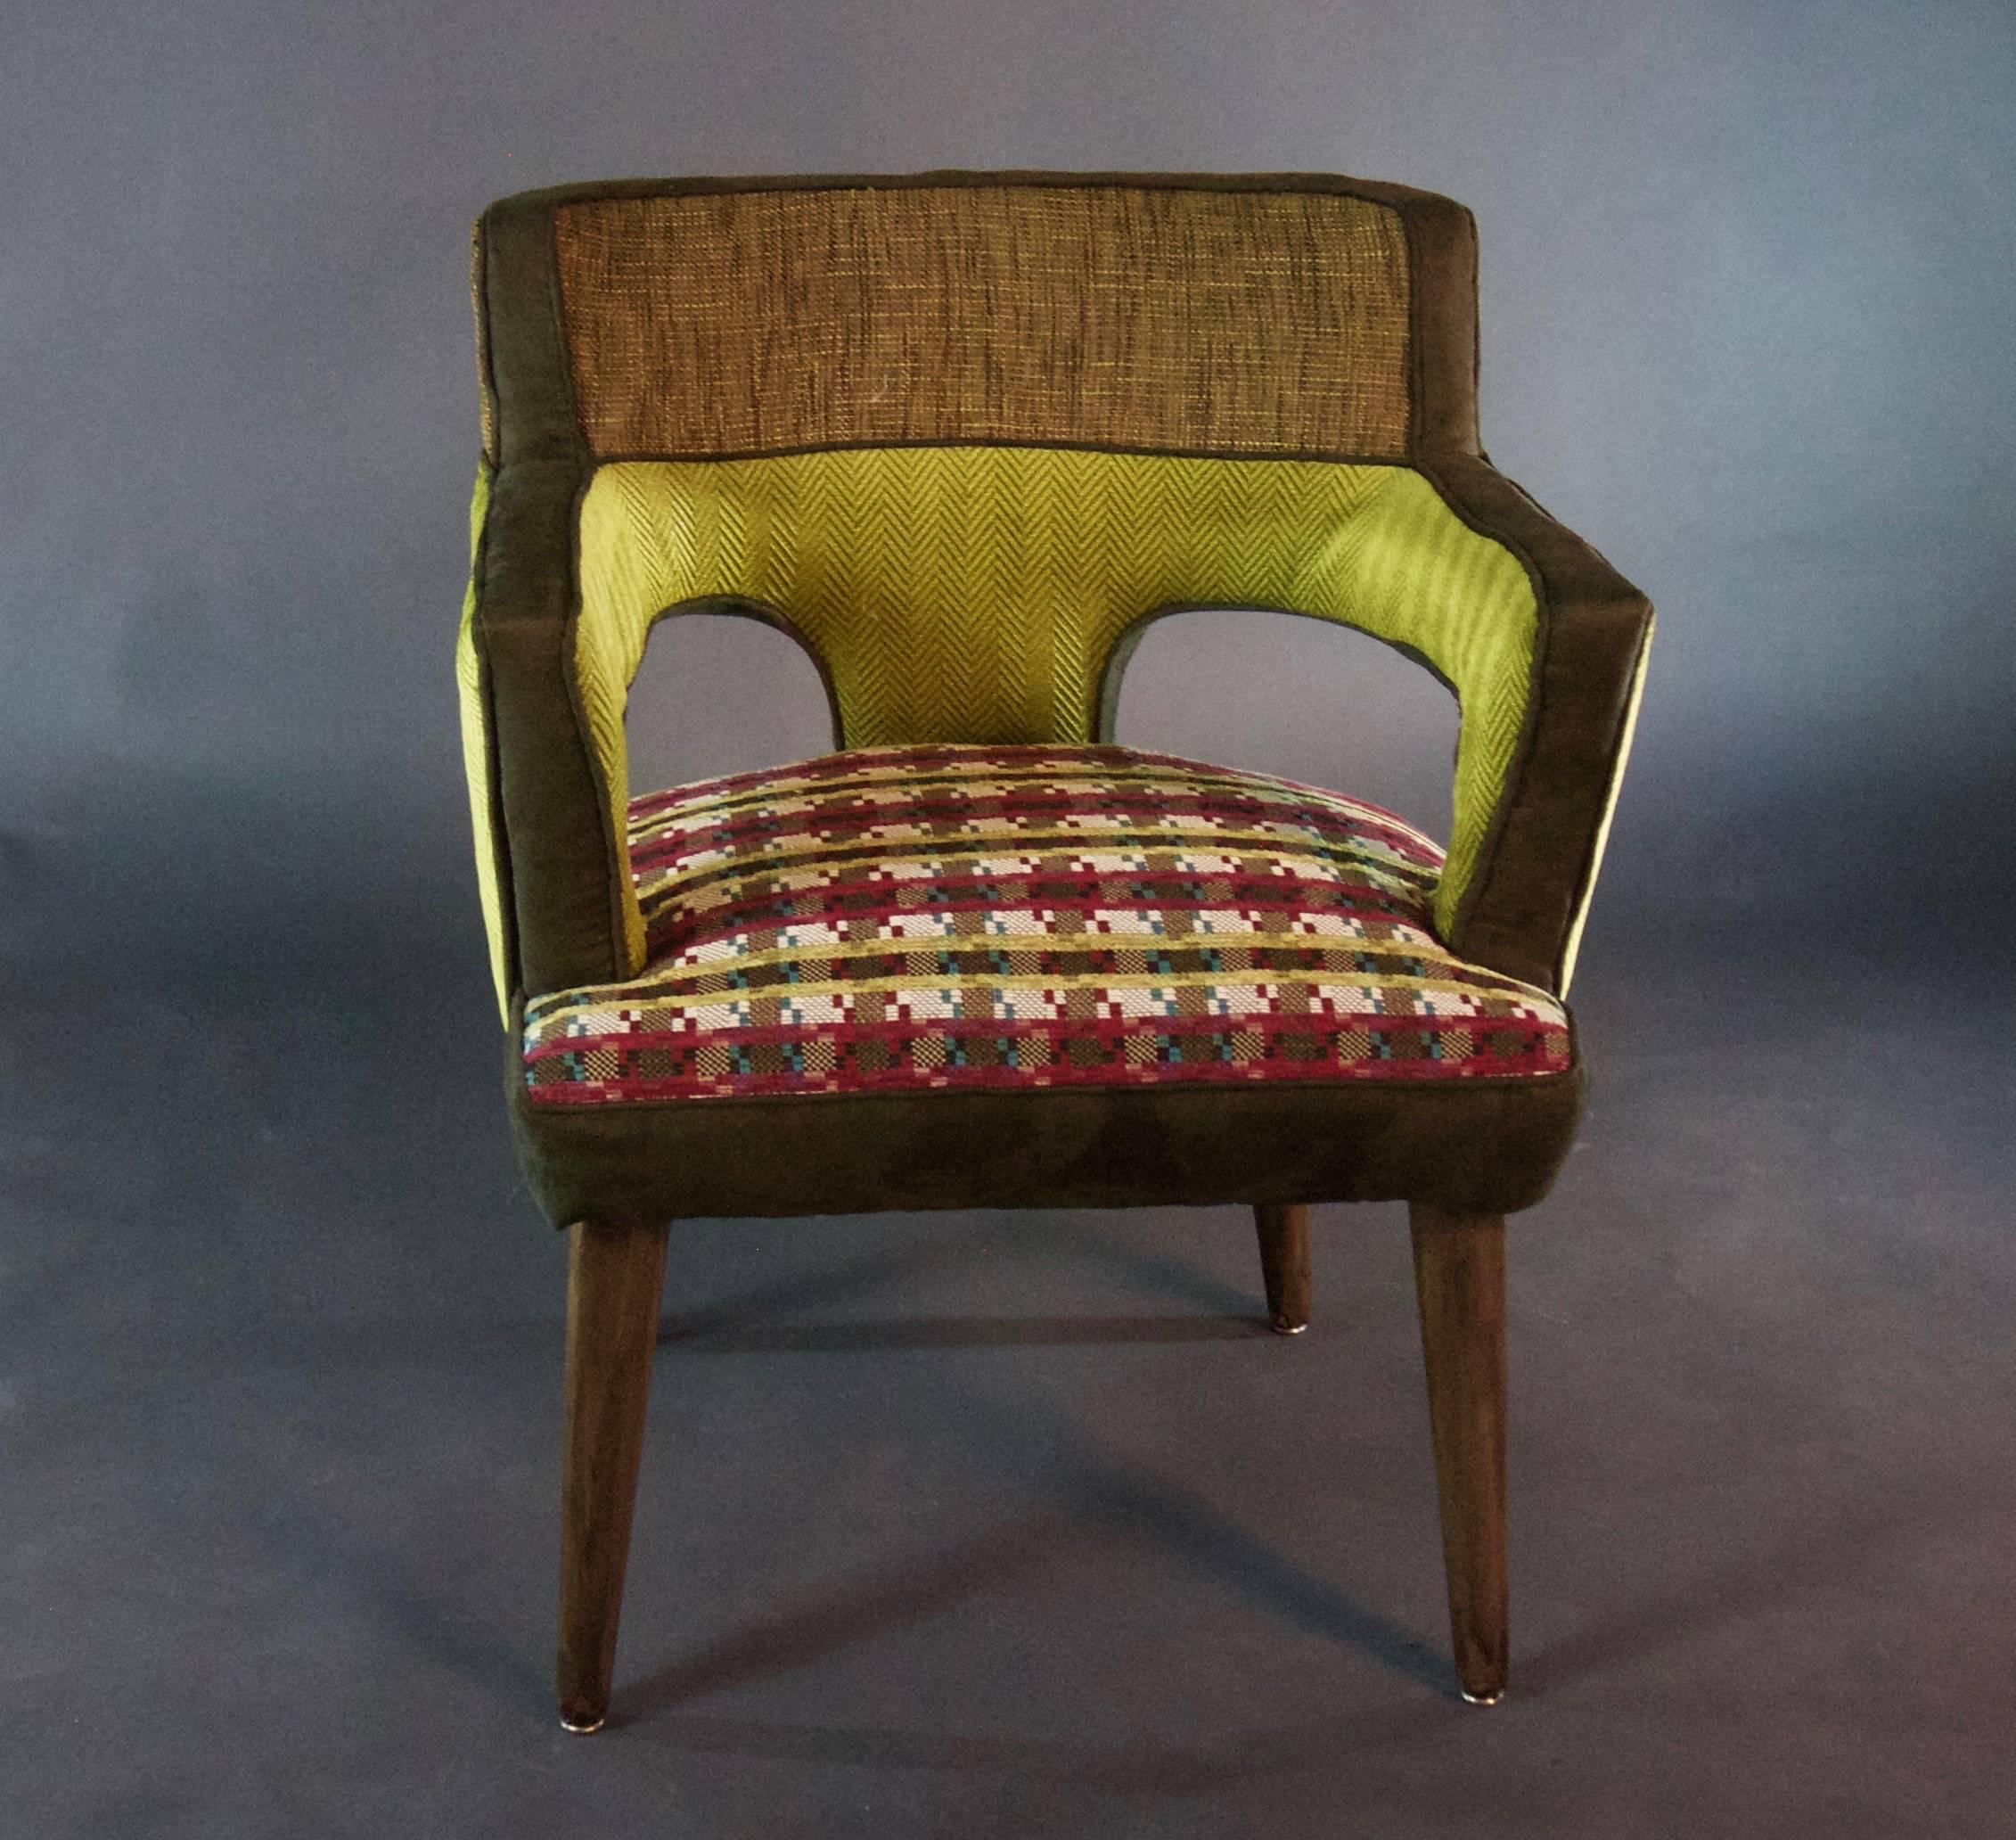 This armchair is reminiscent of 1960s fashion, featuring circular cut-outs in the back. A plaid seat and period chartreuse back and arms, accented by burnt umber trim and a tweed headrest. Unique, dramatic and comfortable.

Like all of our